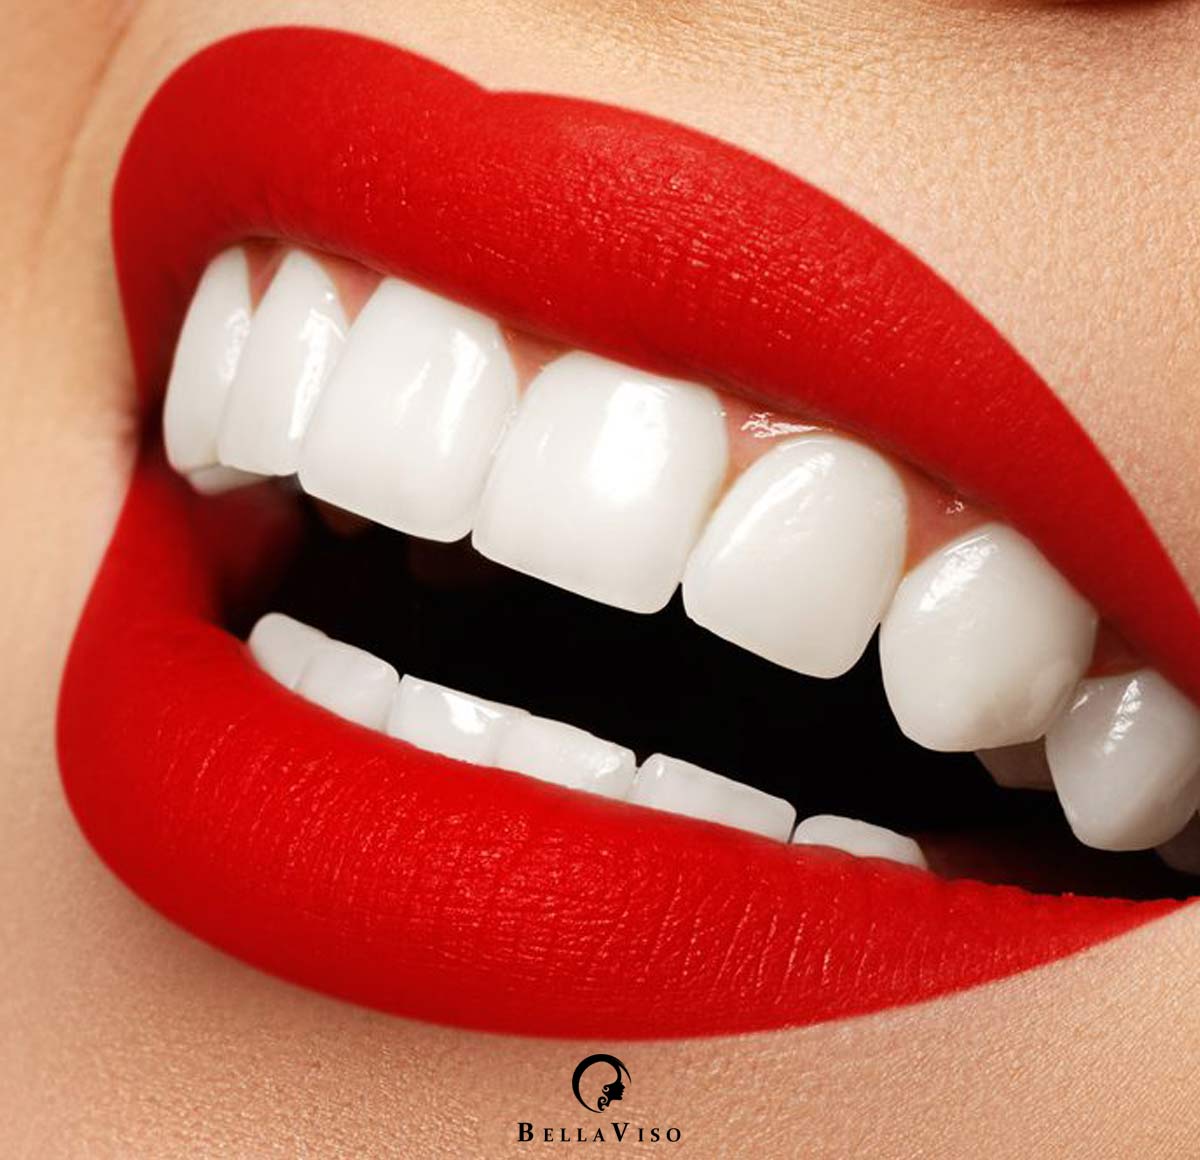 Transform Your Smile: Discover the Top Rated Dental Veneers in Dubai